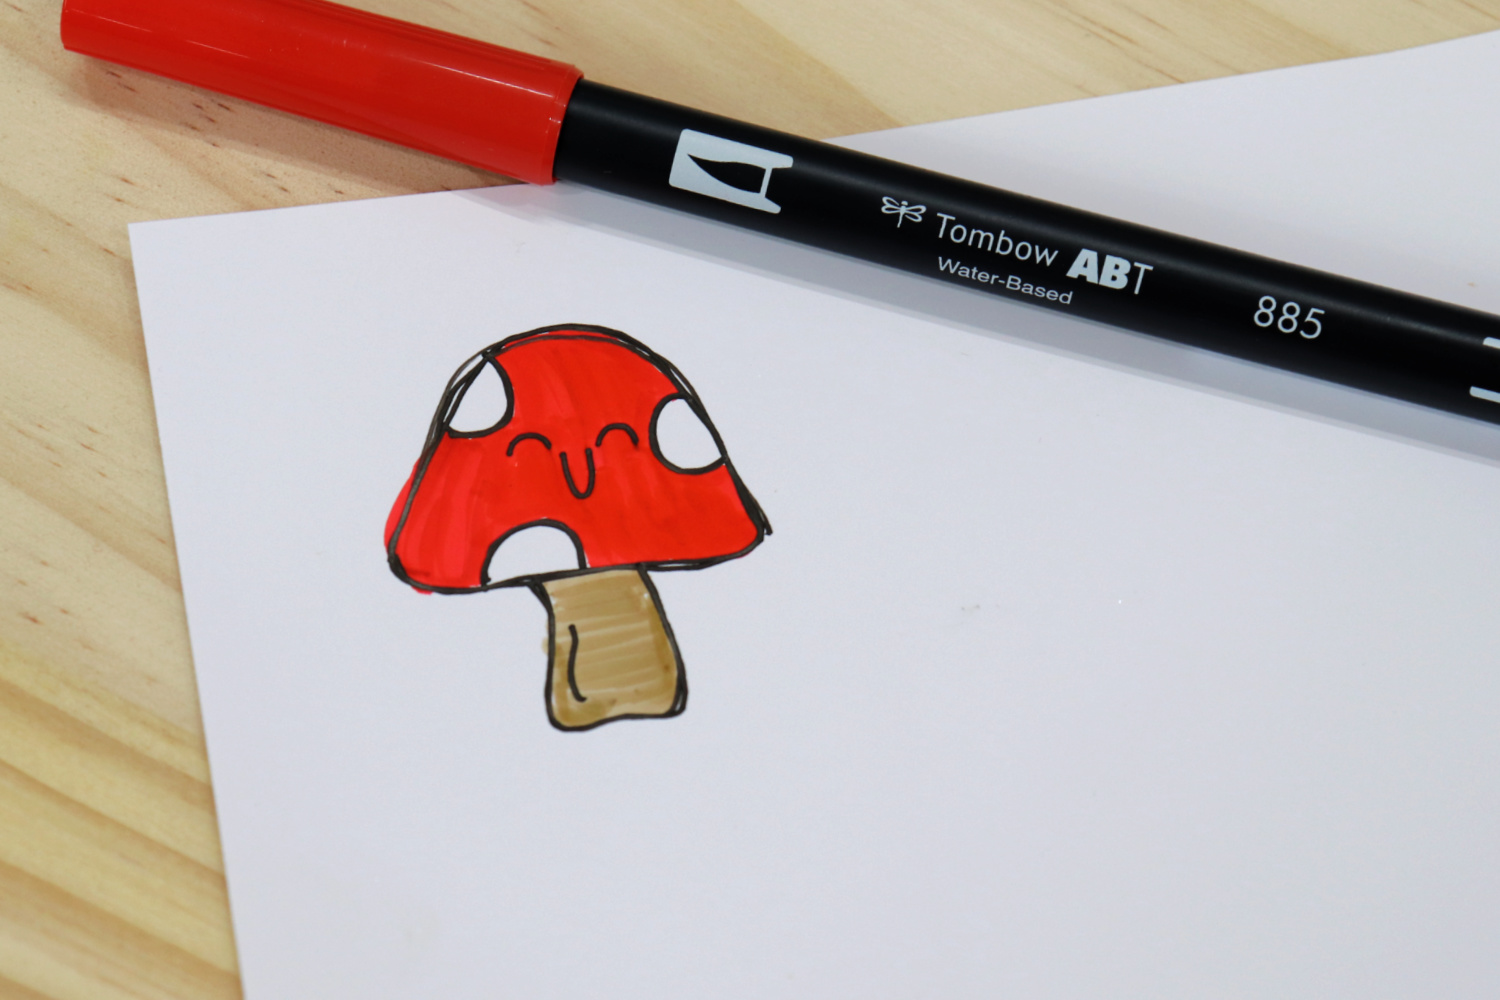 Image contains a red and white toadstool doodled on a piece of white vinyl. A red Dual Brush Pen sits nearby on a wooden background.